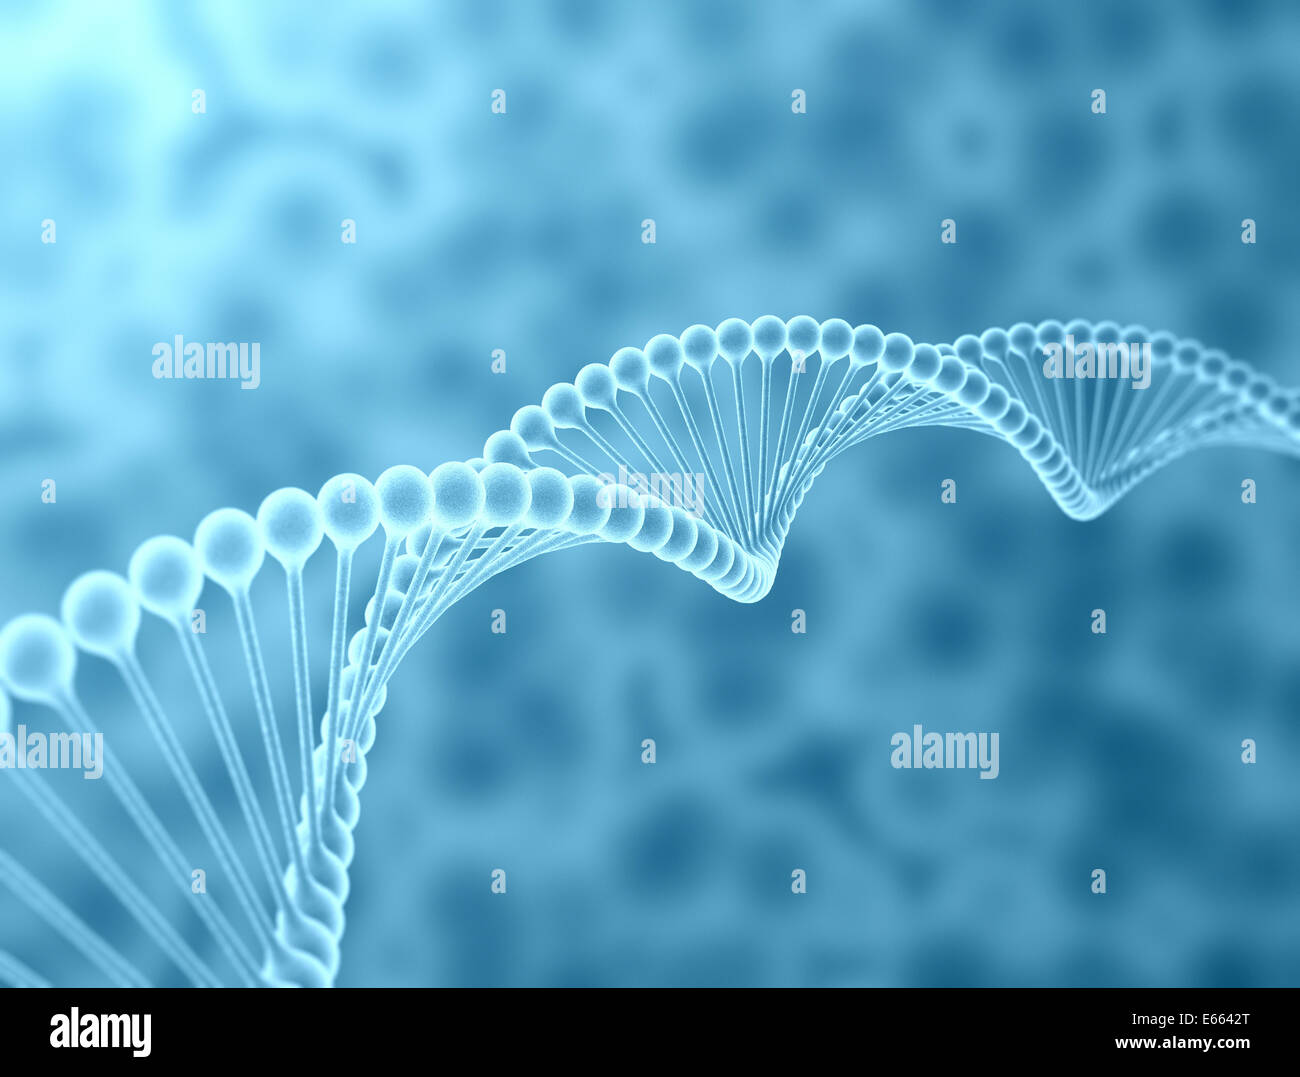 DNA double helix 3d model. High resolution image Stock Photo